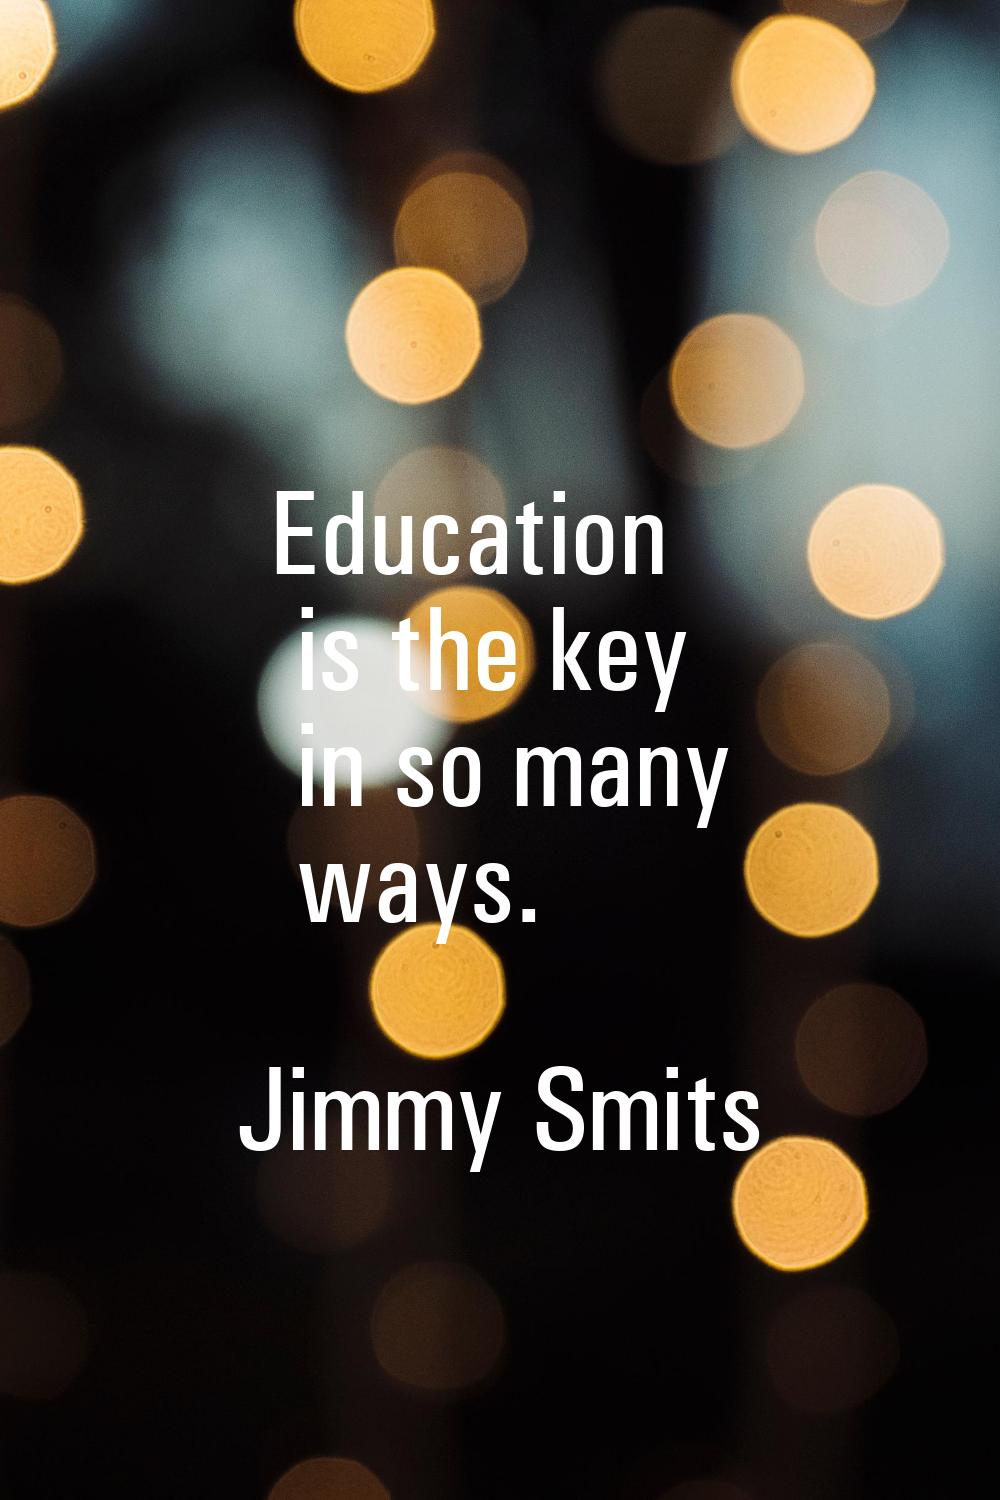 Education is the key in so many ways.